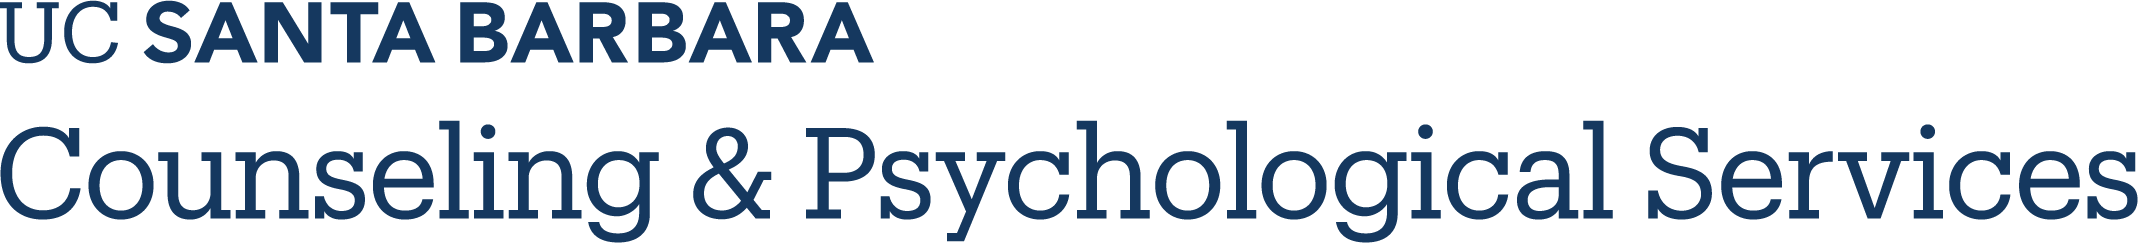 UCSB Counseling & Psychological Services Logo